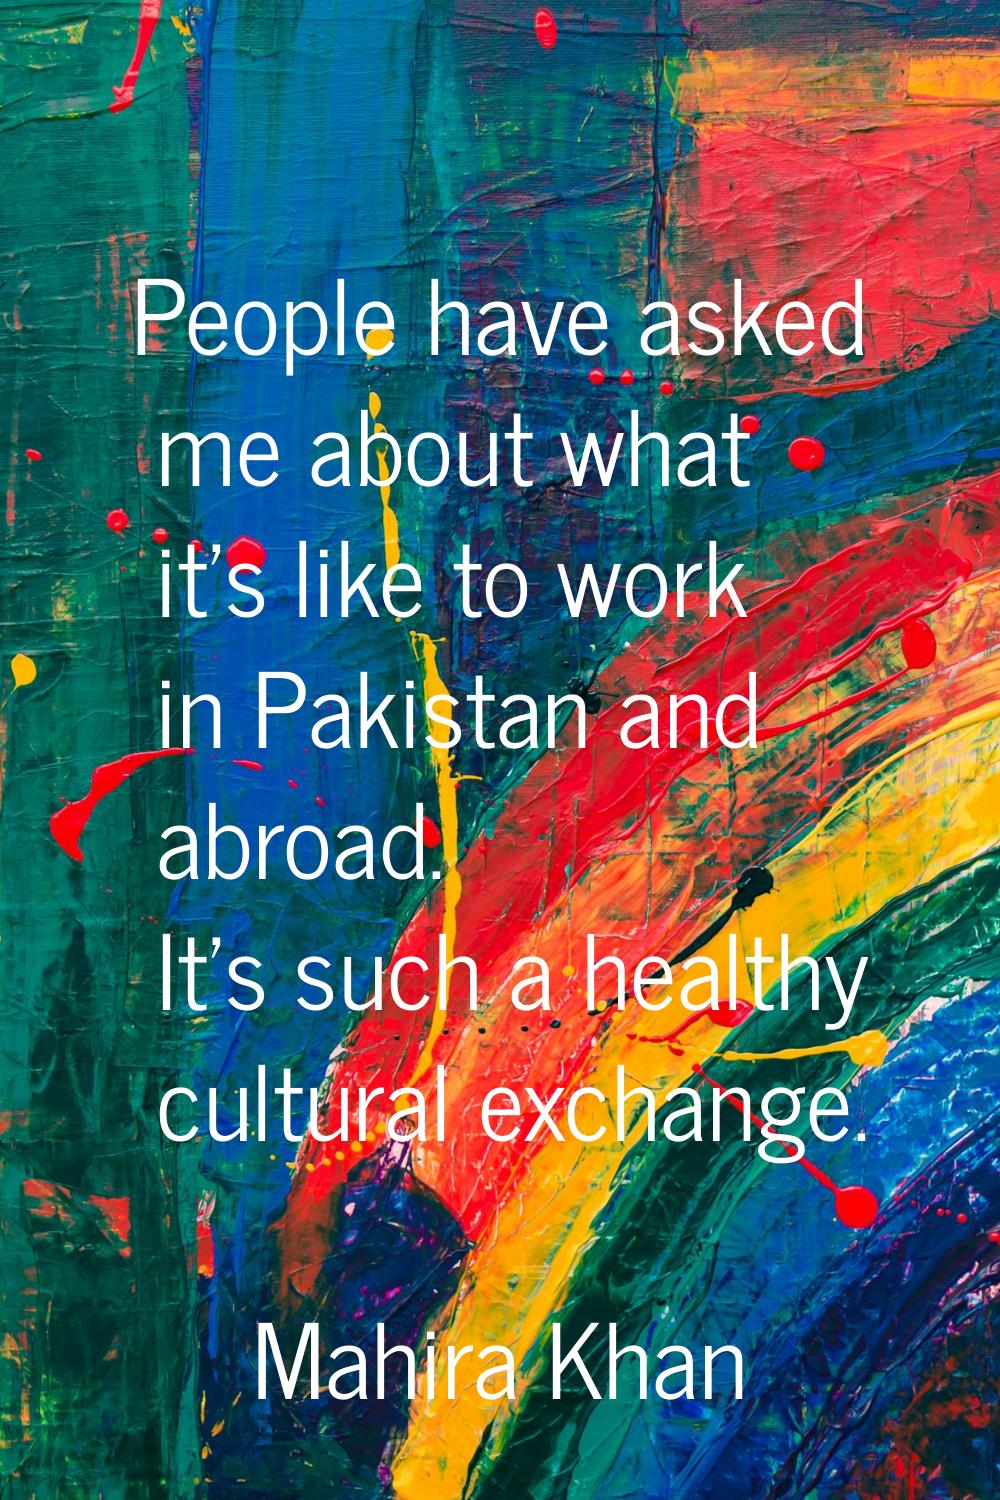 People have asked me about what it's like to work in Pakistan and abroad. It's such a healthy cultu